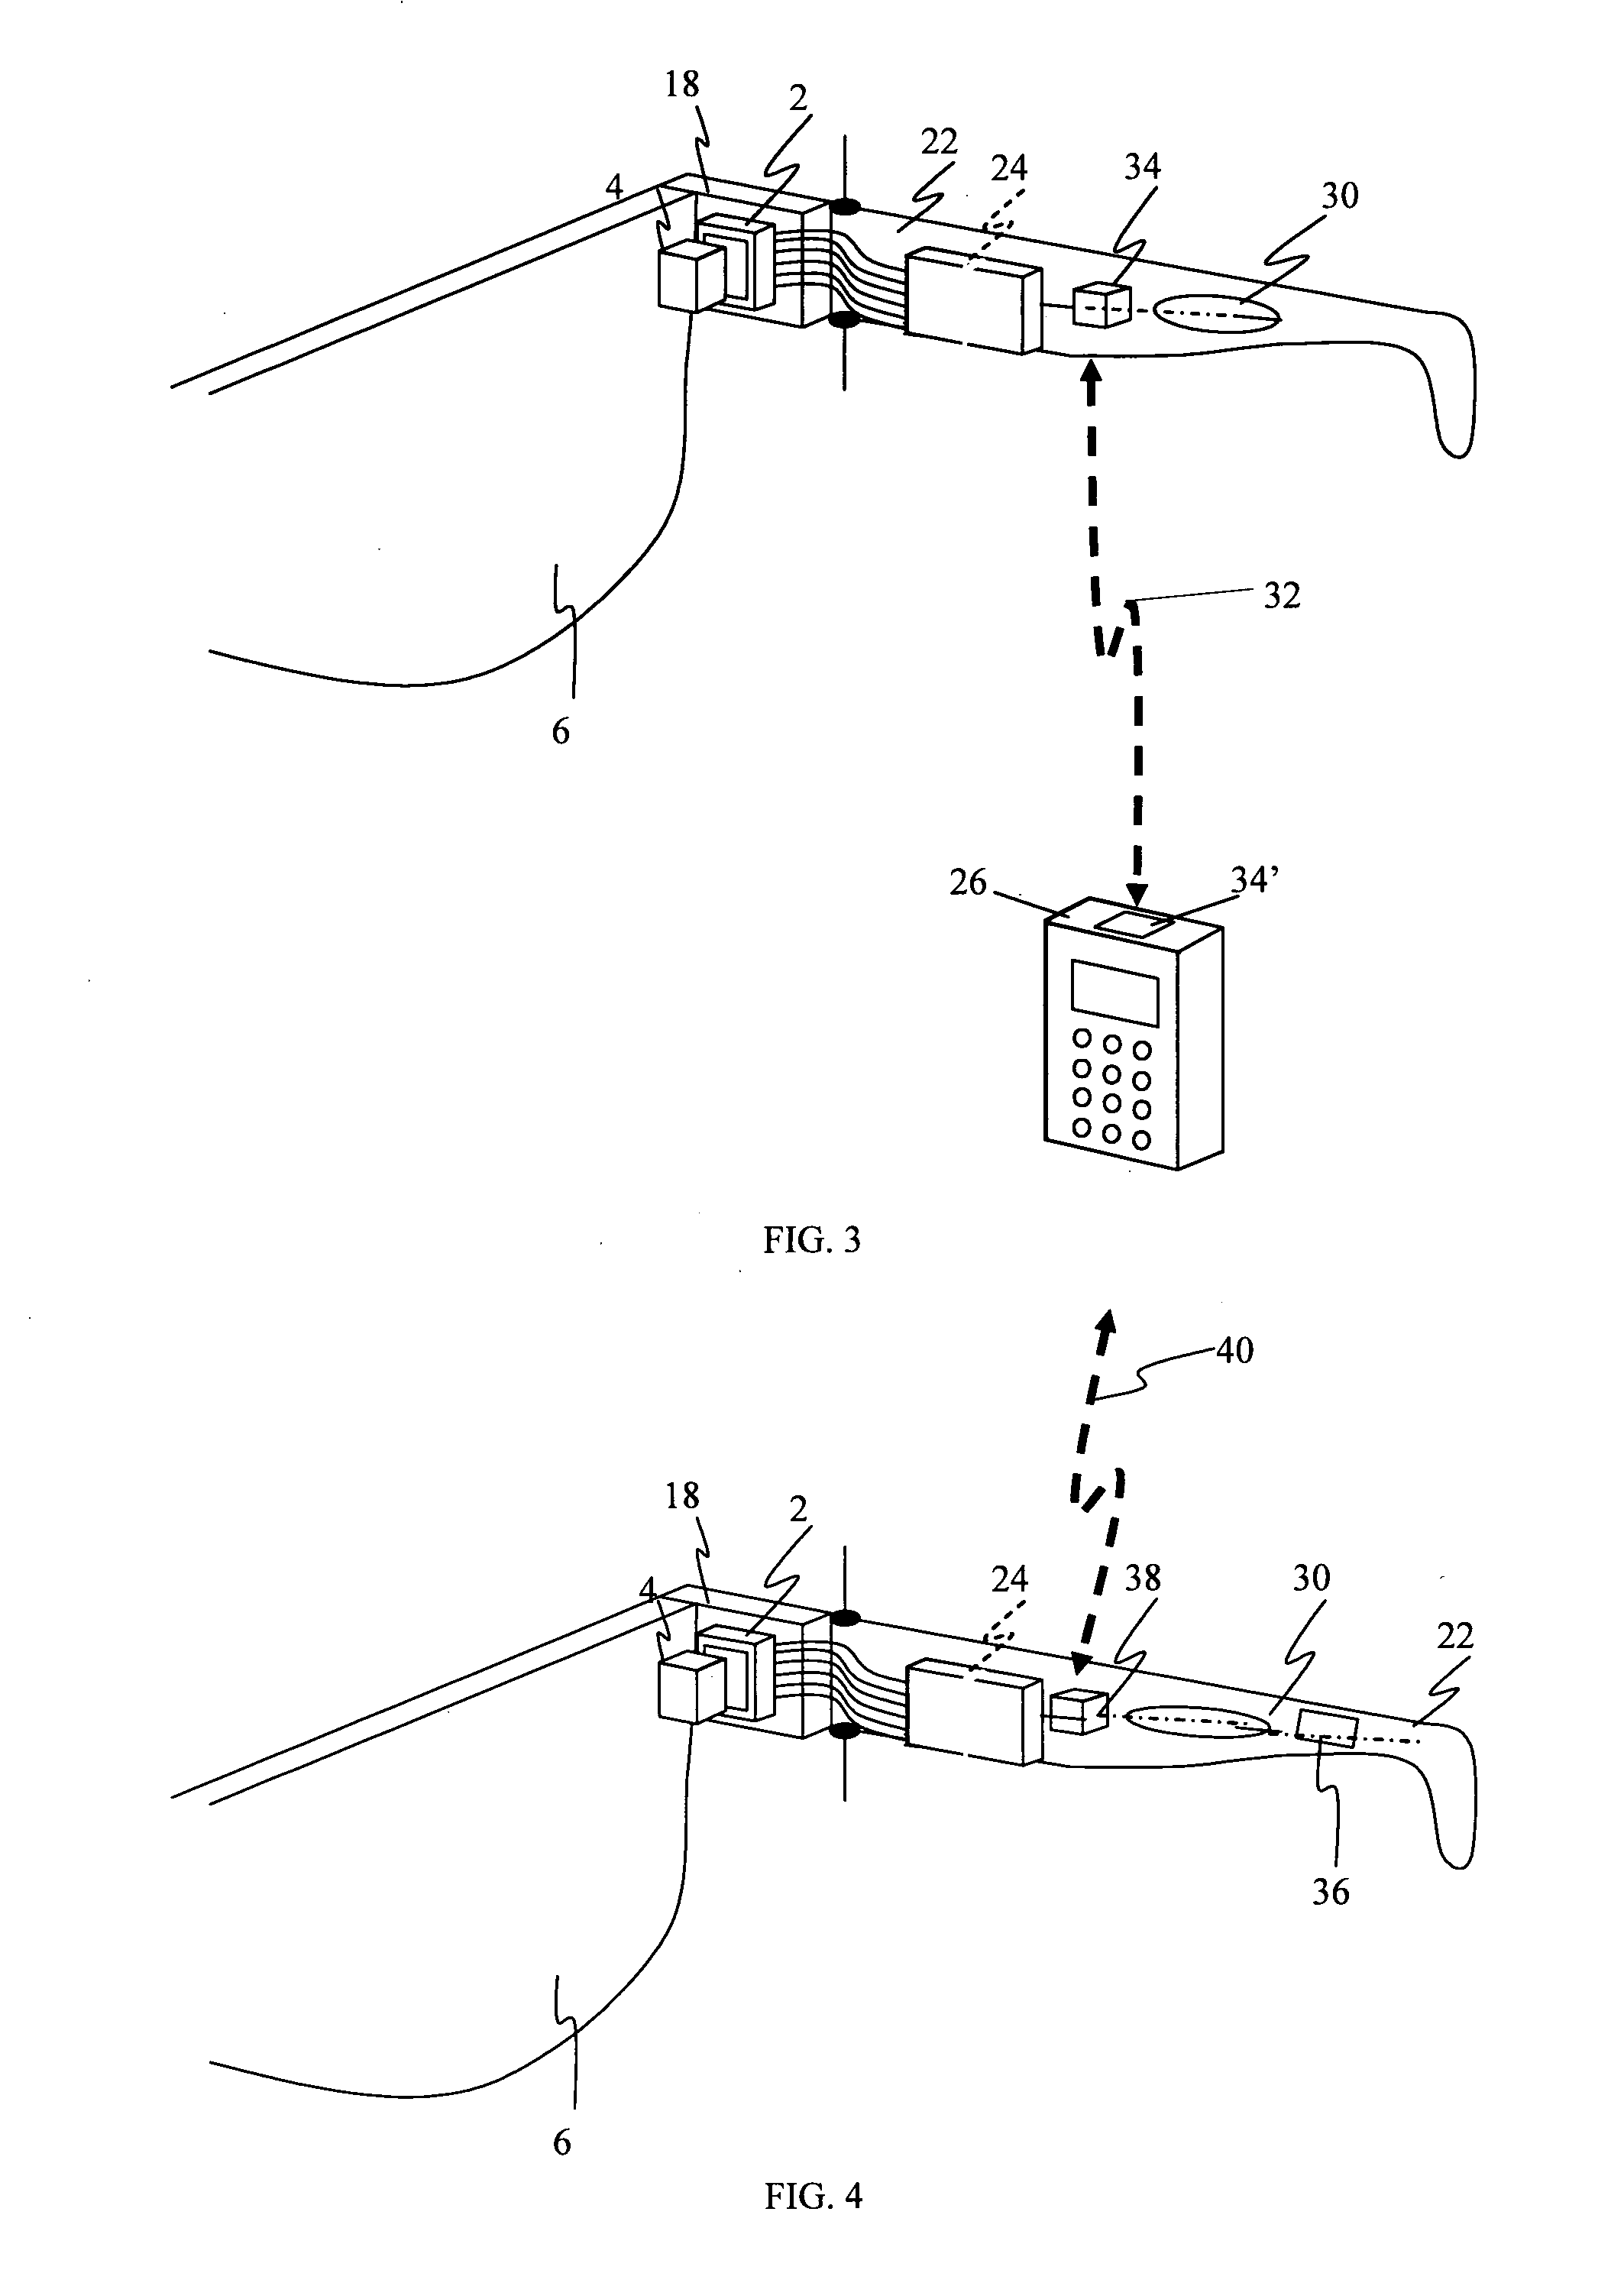 Distributed head-mounted display system